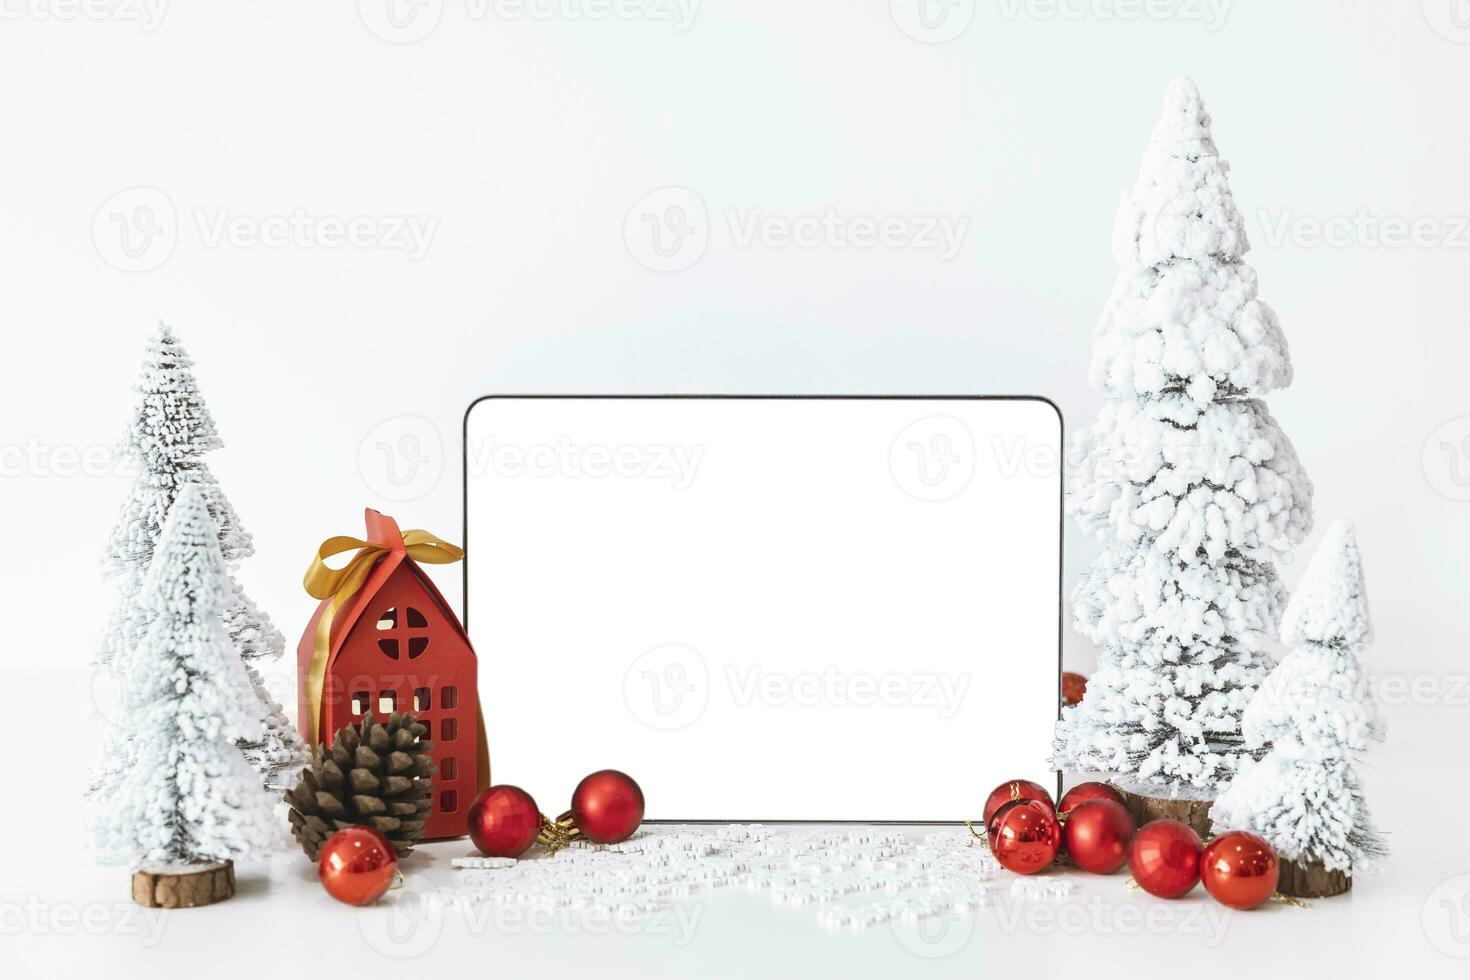 Tapelet with a white screen mock-up and White calendar with a festive scene of a beautiful Christmas tree adorned, with Christmas balls, pine cones, and a red house gift box. photo